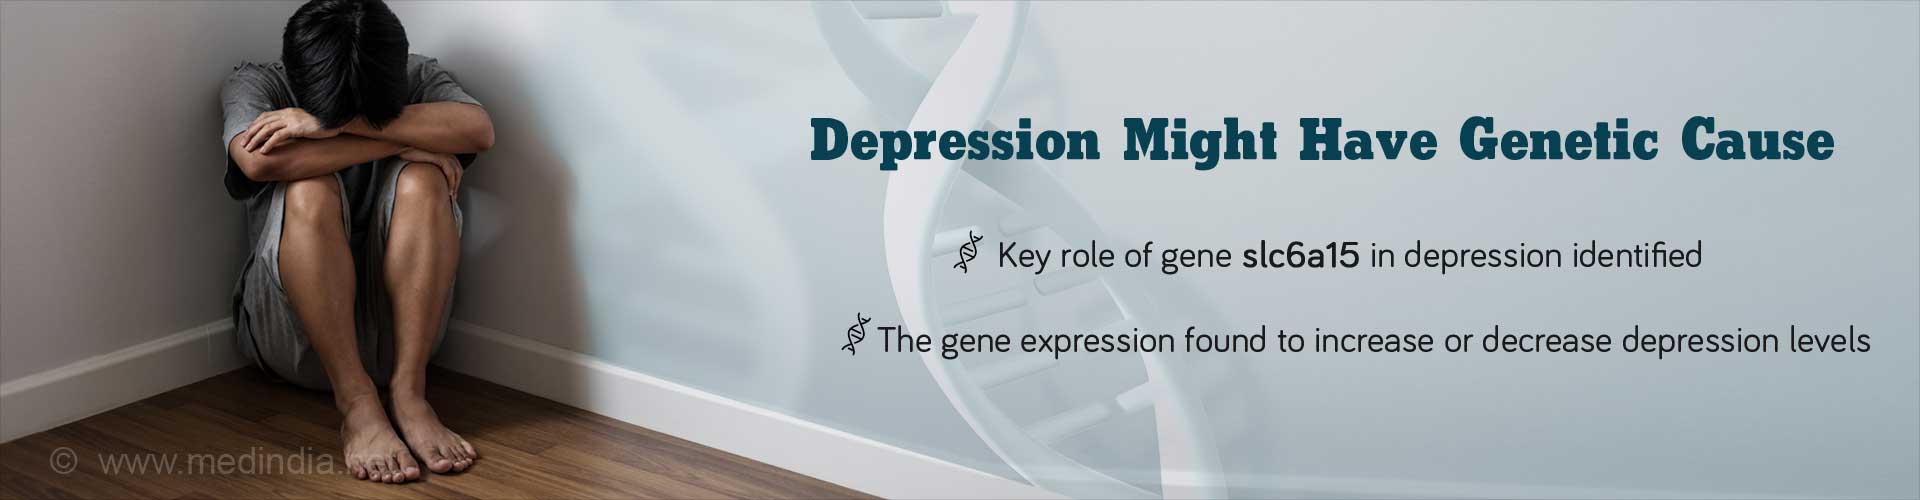 Depression May Have Genetic Cause
- Key role of gene slc6a15 in depression identified
- The gene expression found to increase or decrease depression levels